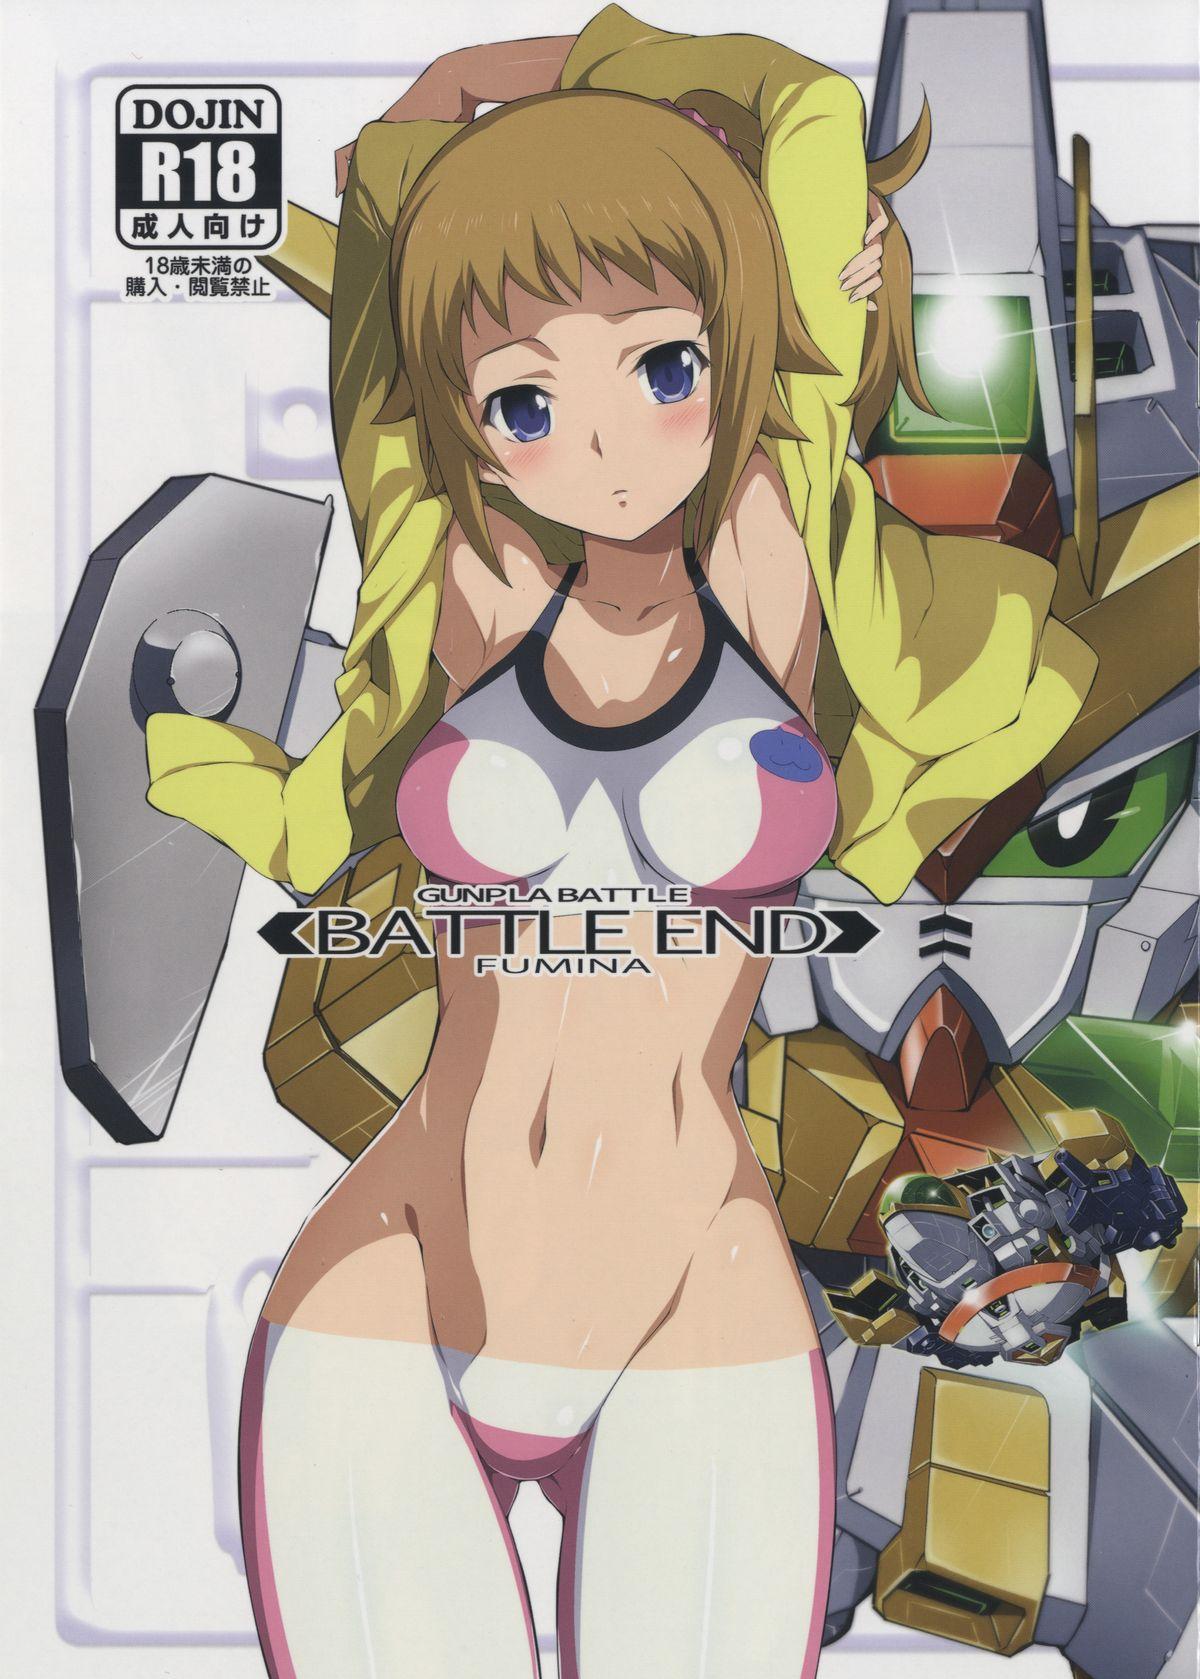 Aunt BATTLE END FUMINA - Gundam build fighters try Beard - Picture 1